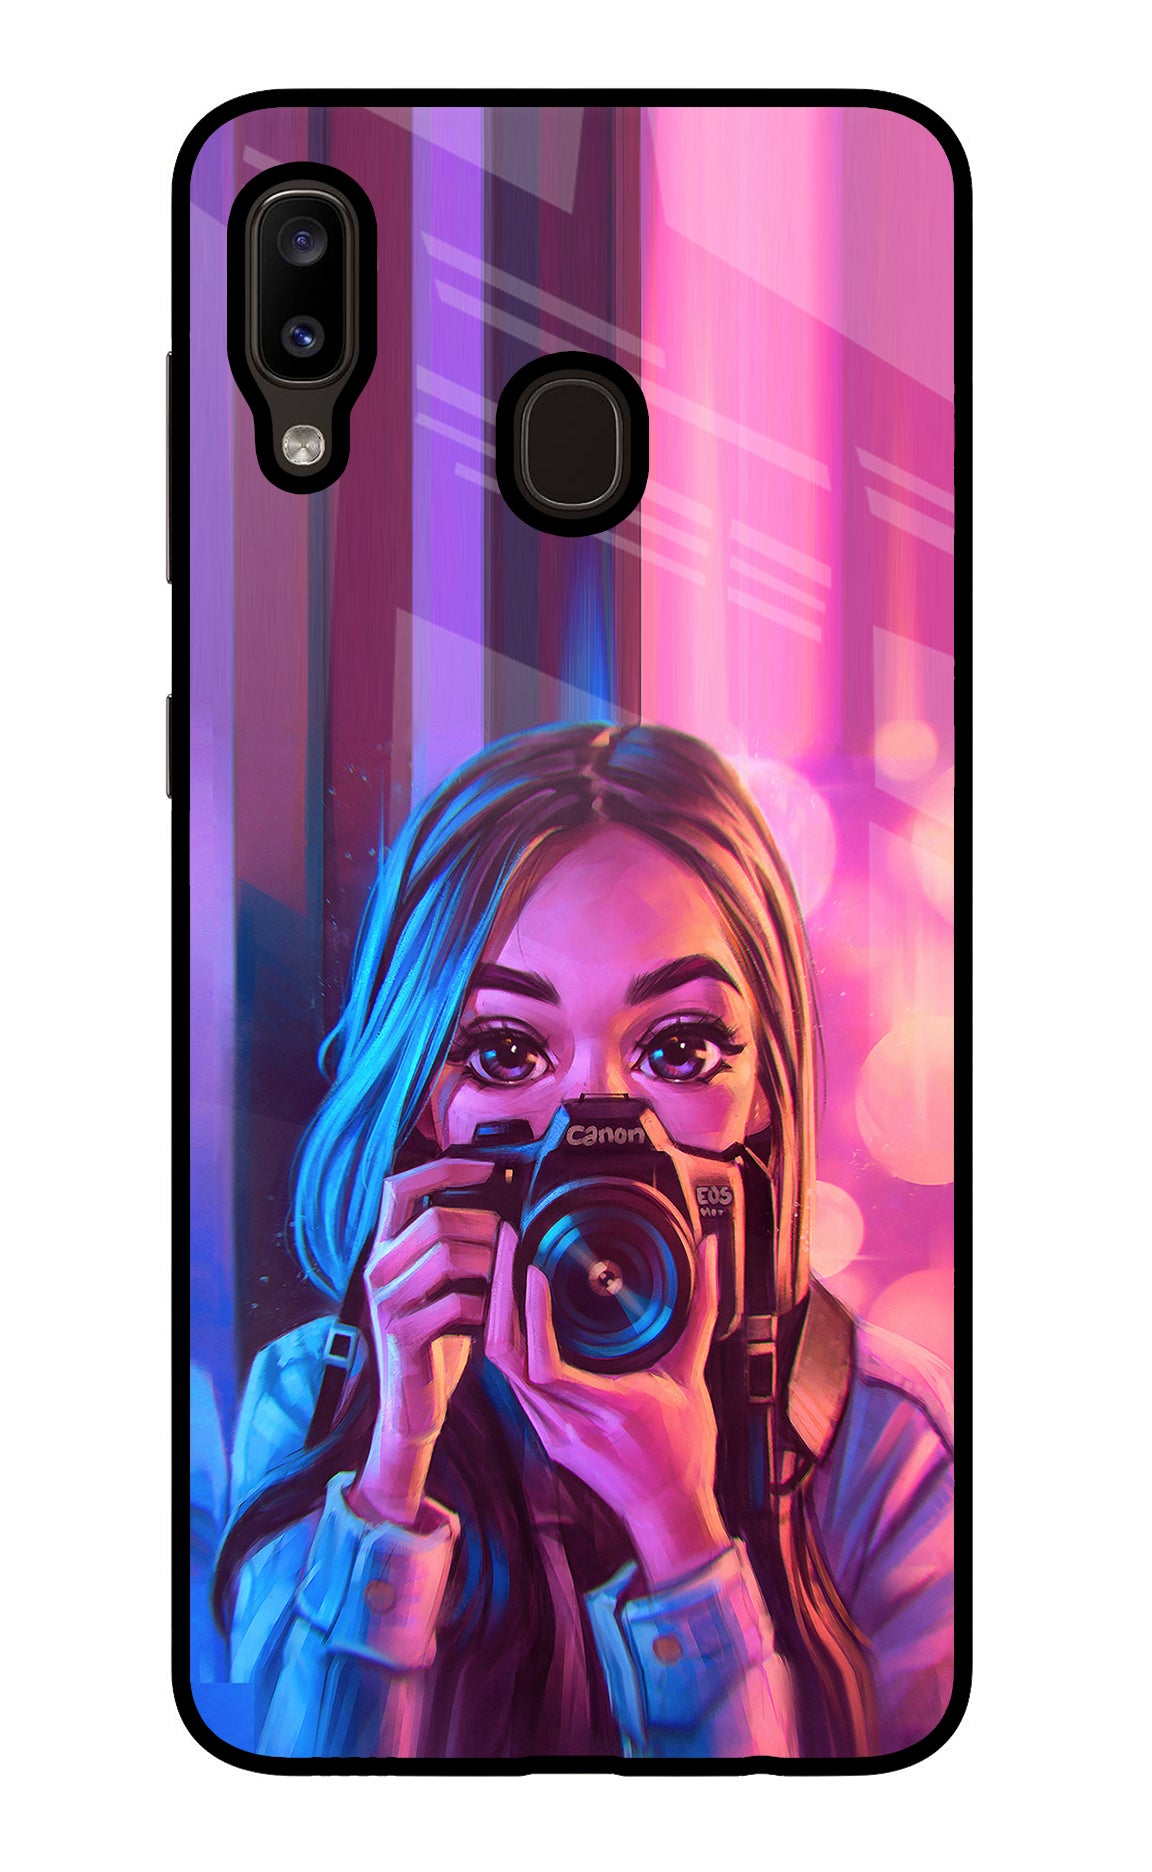 Girl Photographer Samsung A20/M10s Back Cover